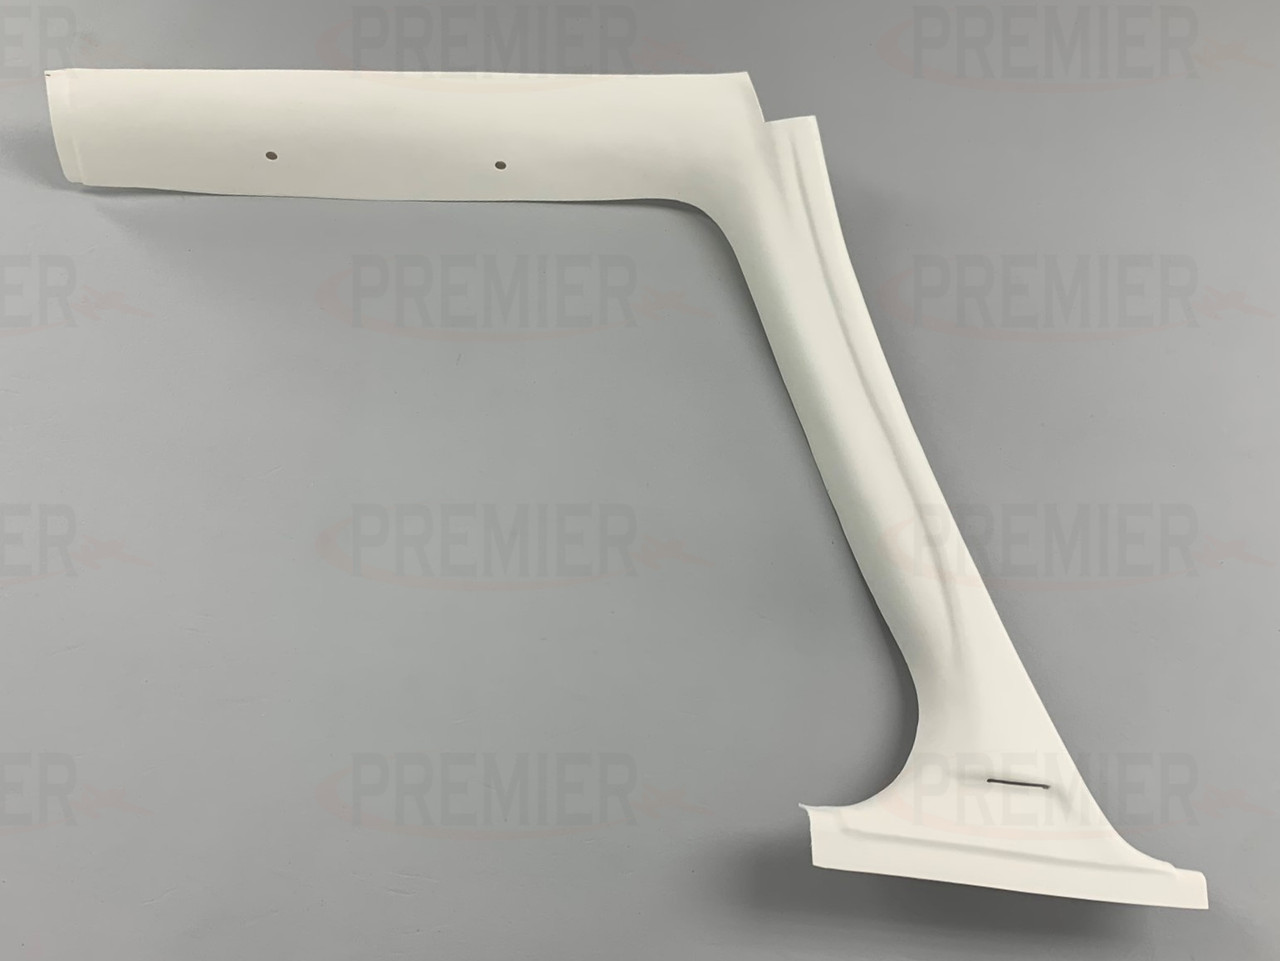 H78349-17,  Piper PA-32, 32R, 32RT, 34, Front Left Window Frame Cover, 78349-15, 78349-015, 78349-17, 78349-017